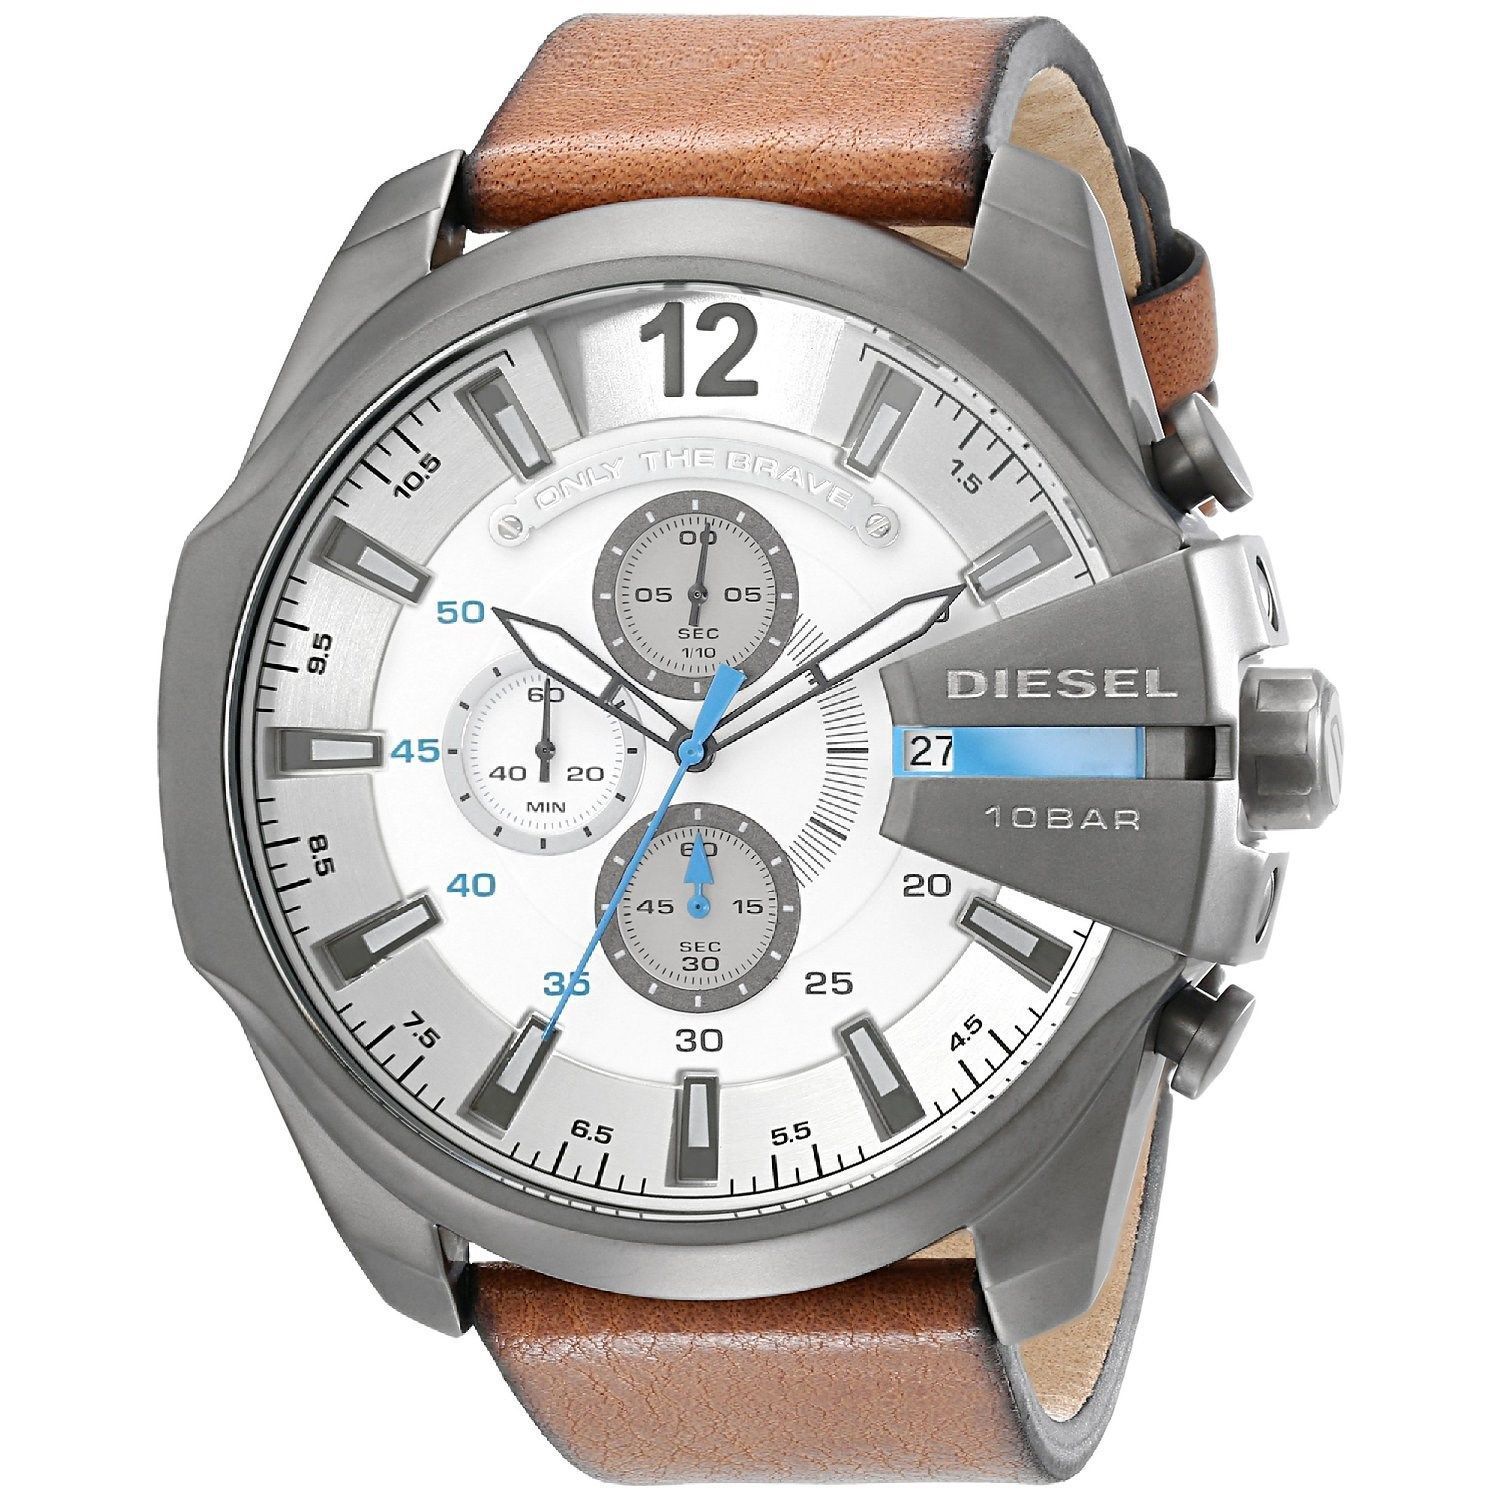 Shop Diesel Men's Brown Leather Quartz Watch with White Dial - Free ...